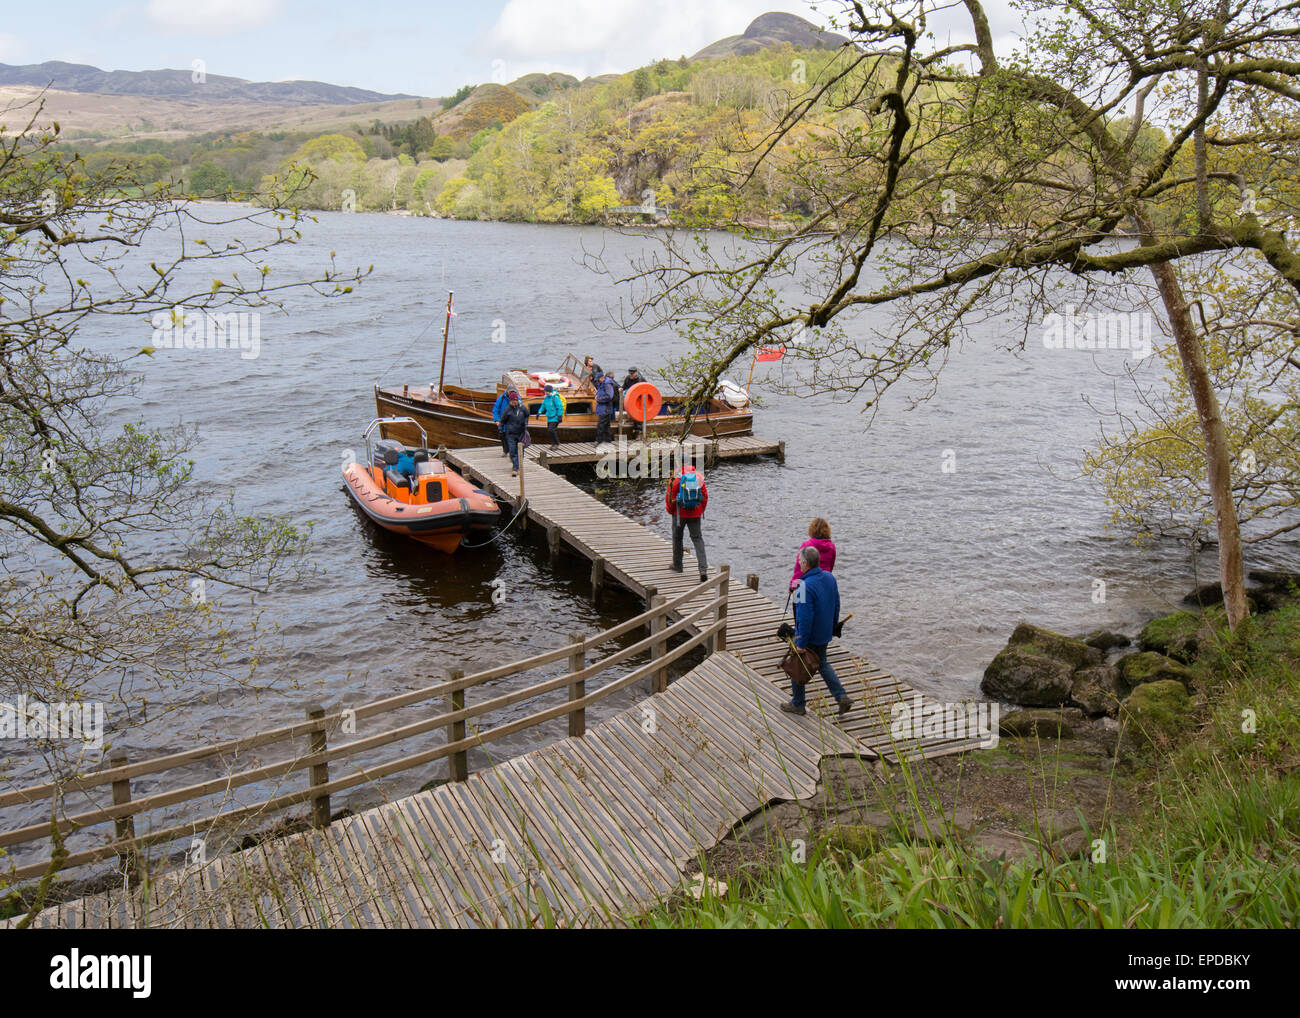 Ferry moored at North Pier - Inchcailloch - an island on Loch Lomond, Scotland, UK. Stock Photo